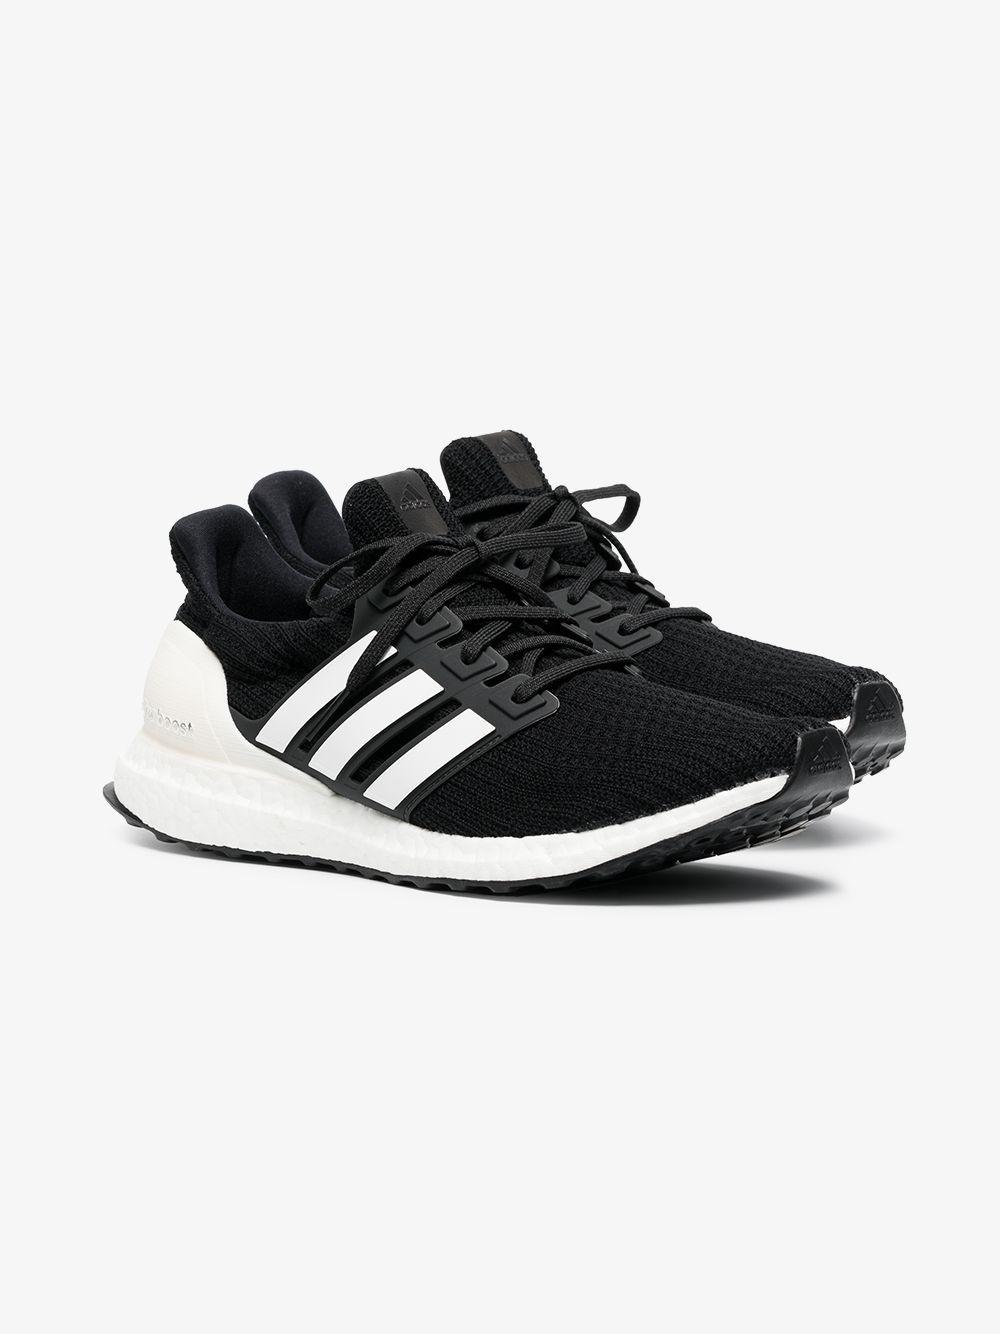 Addidas Boost Logo - Adidas Black Ultra Boost logo detail sneakers | Low-Tops | Browns